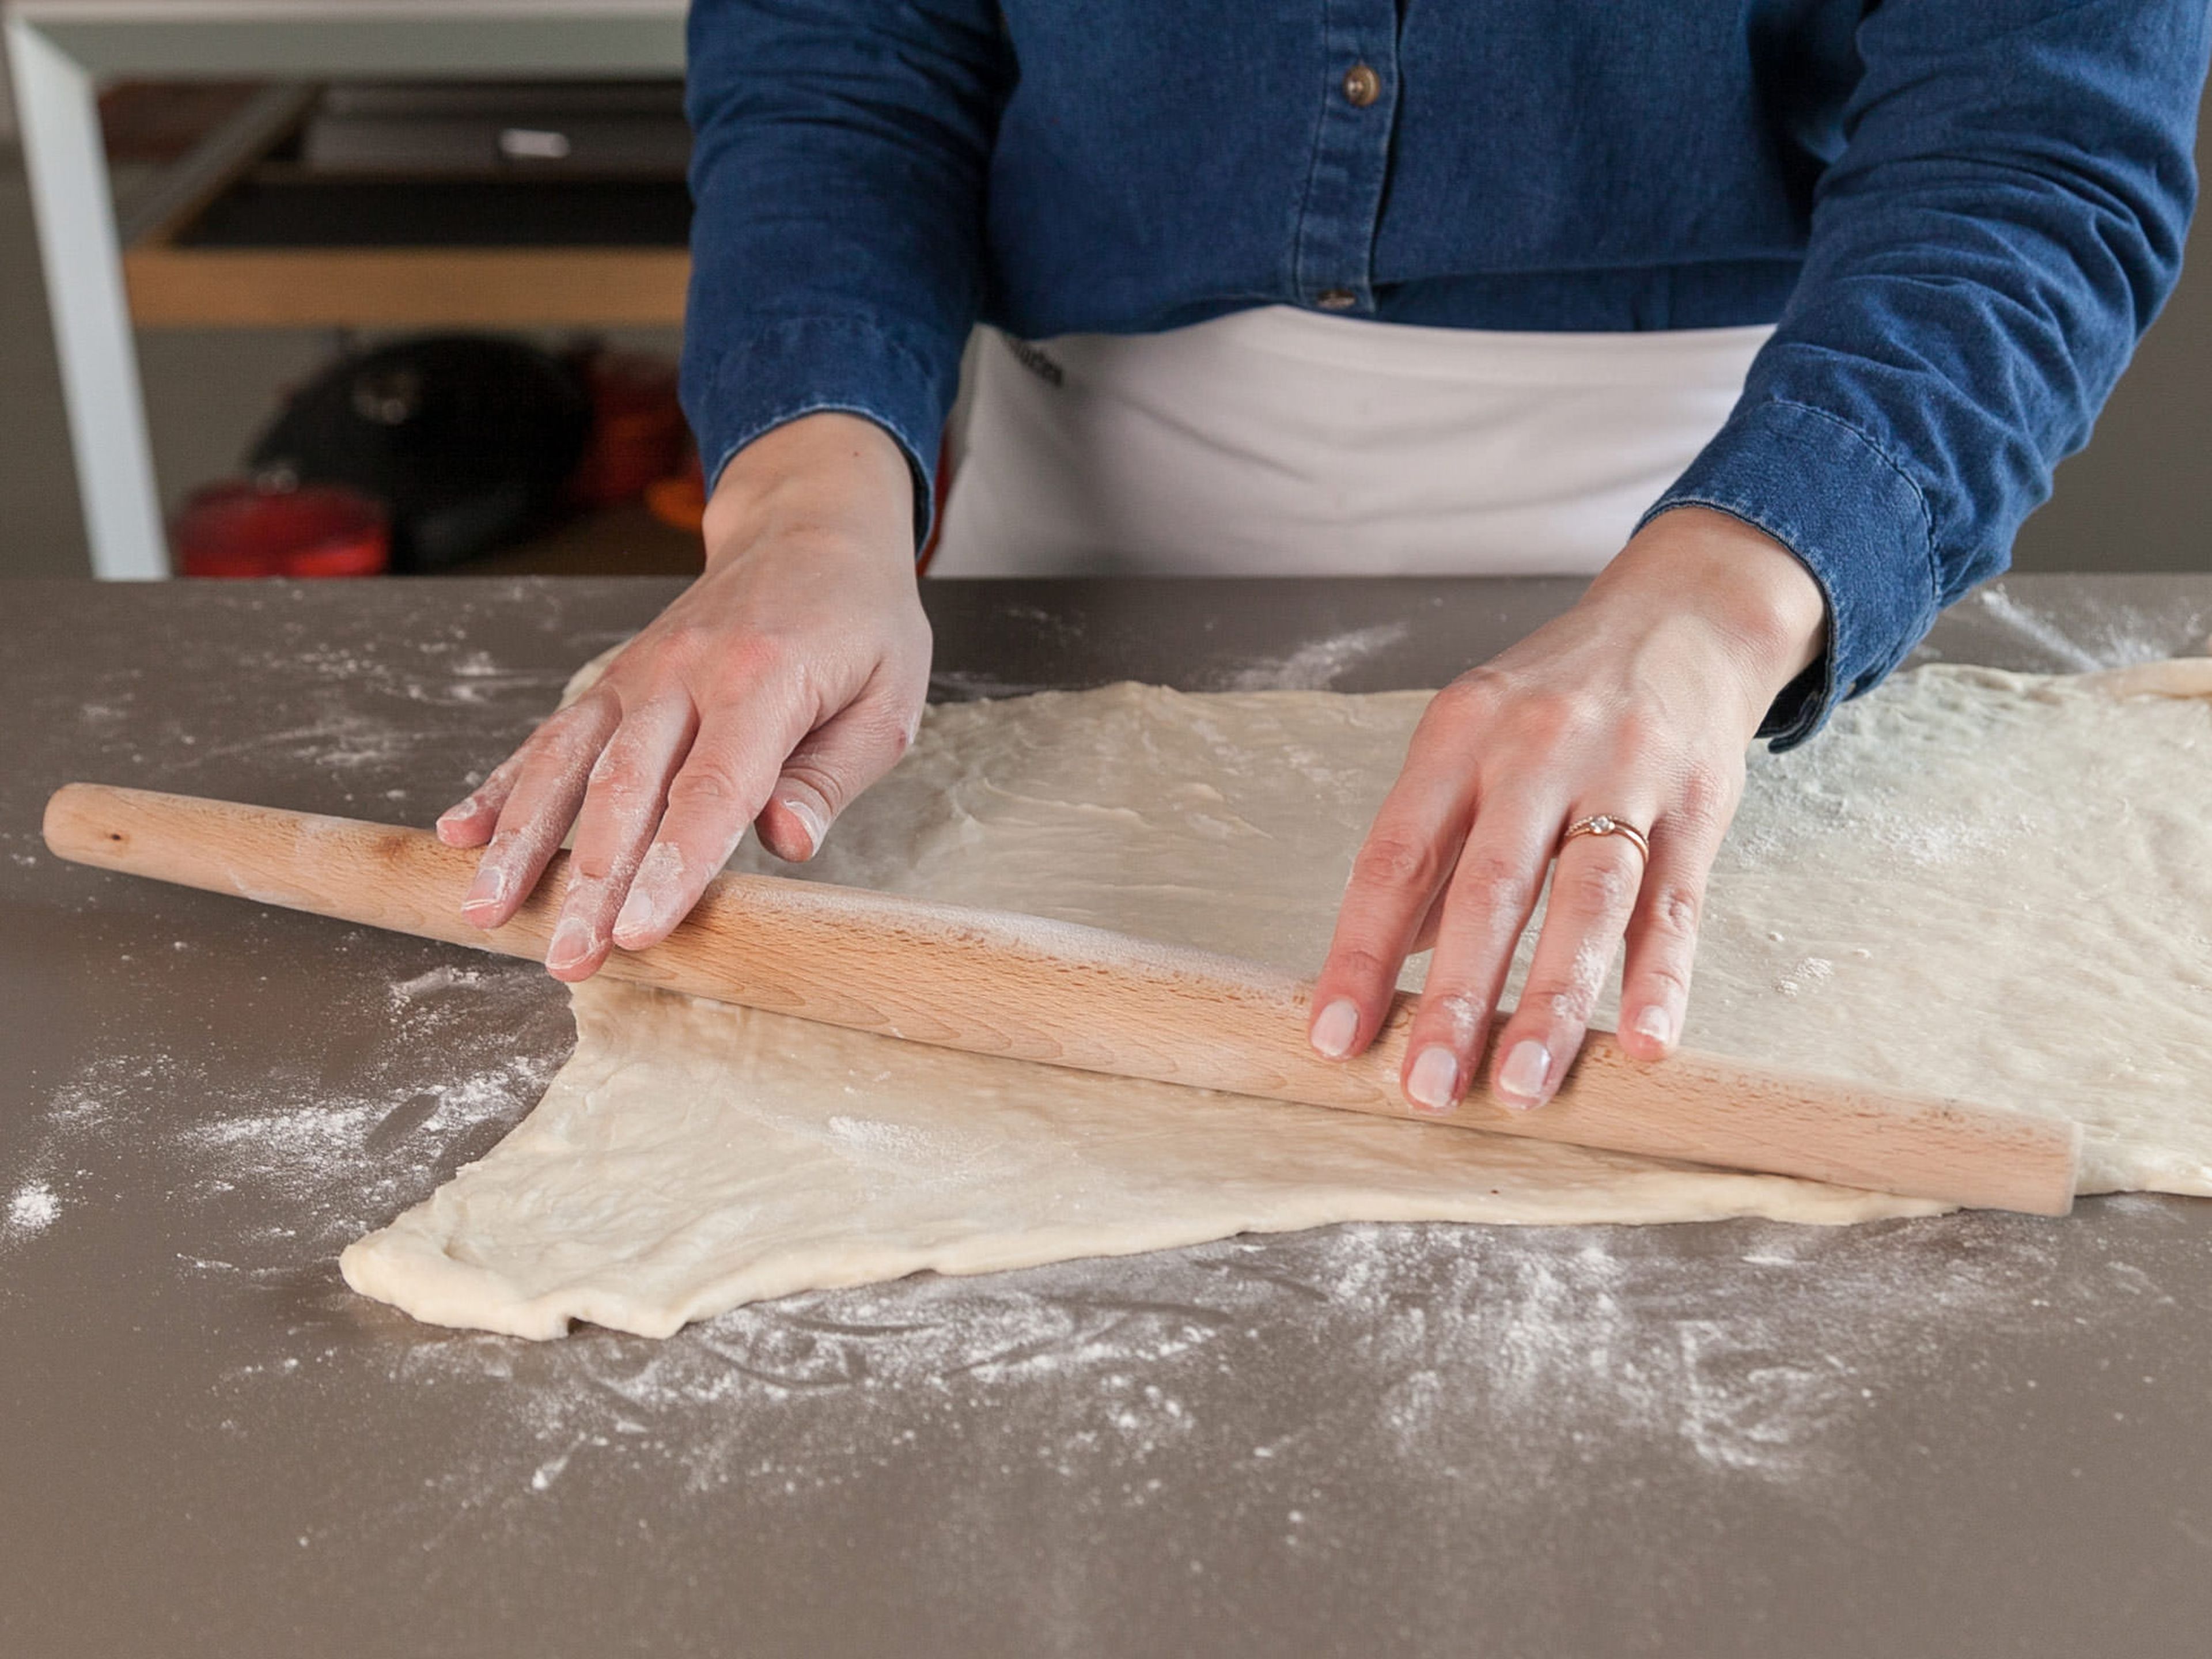 Let bread dough thaw, then roll into a 25x35-cm/10x14-in. rectangle on a lightly floured surface.